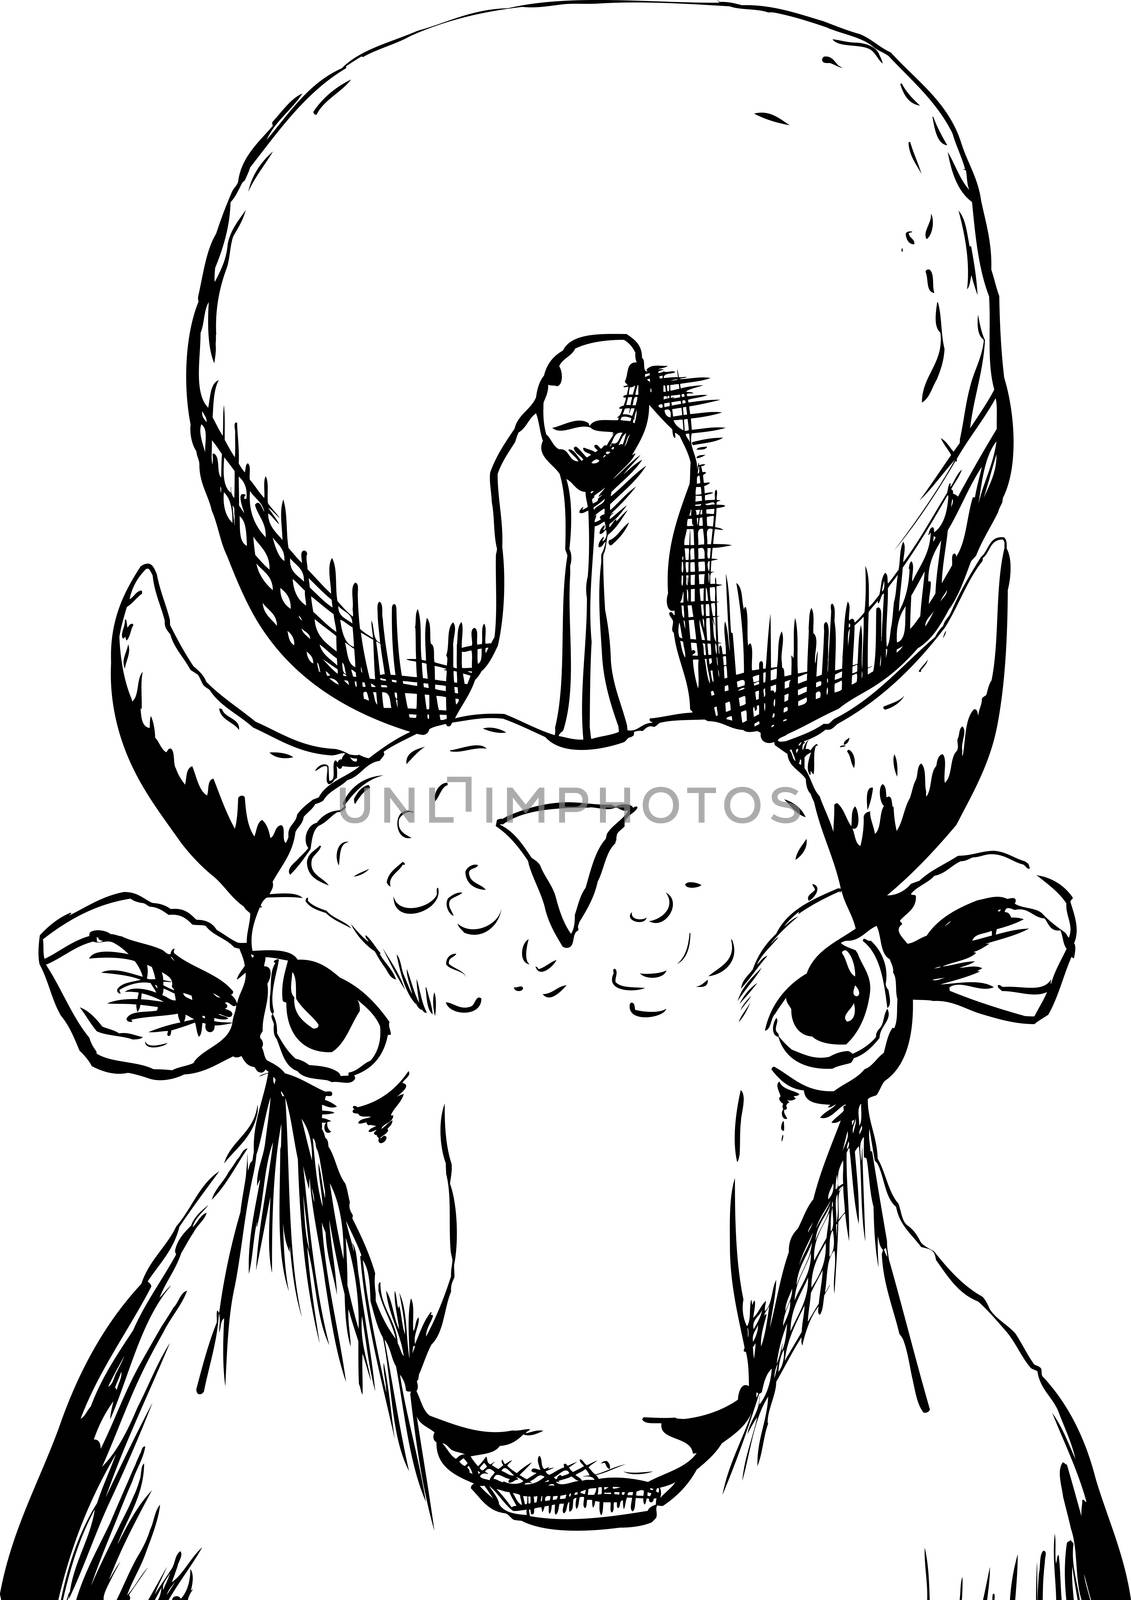 Outlined Apis bull god with sun disk by TheBlackRhino